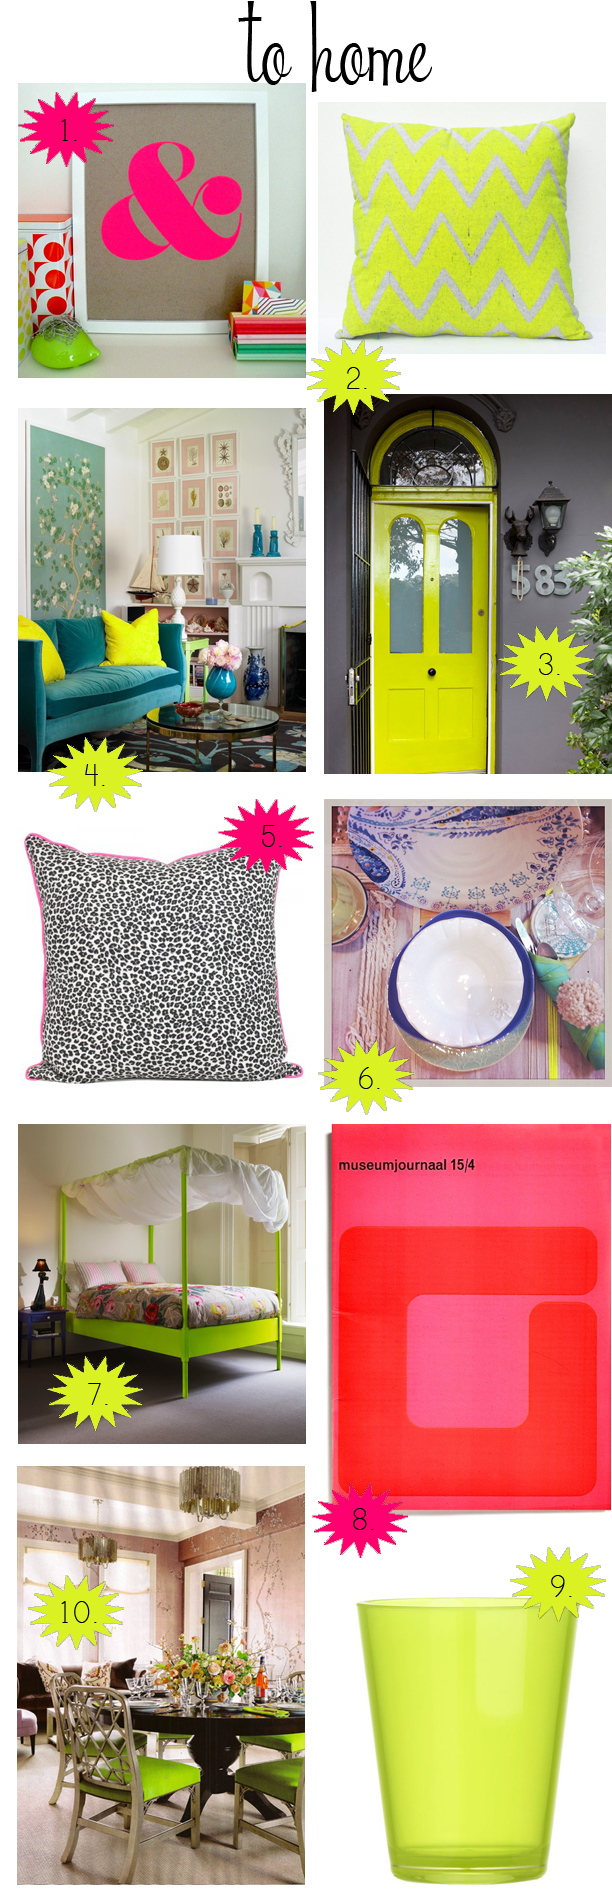 Translating The 2013 Neon Trend... From Fashion To Home